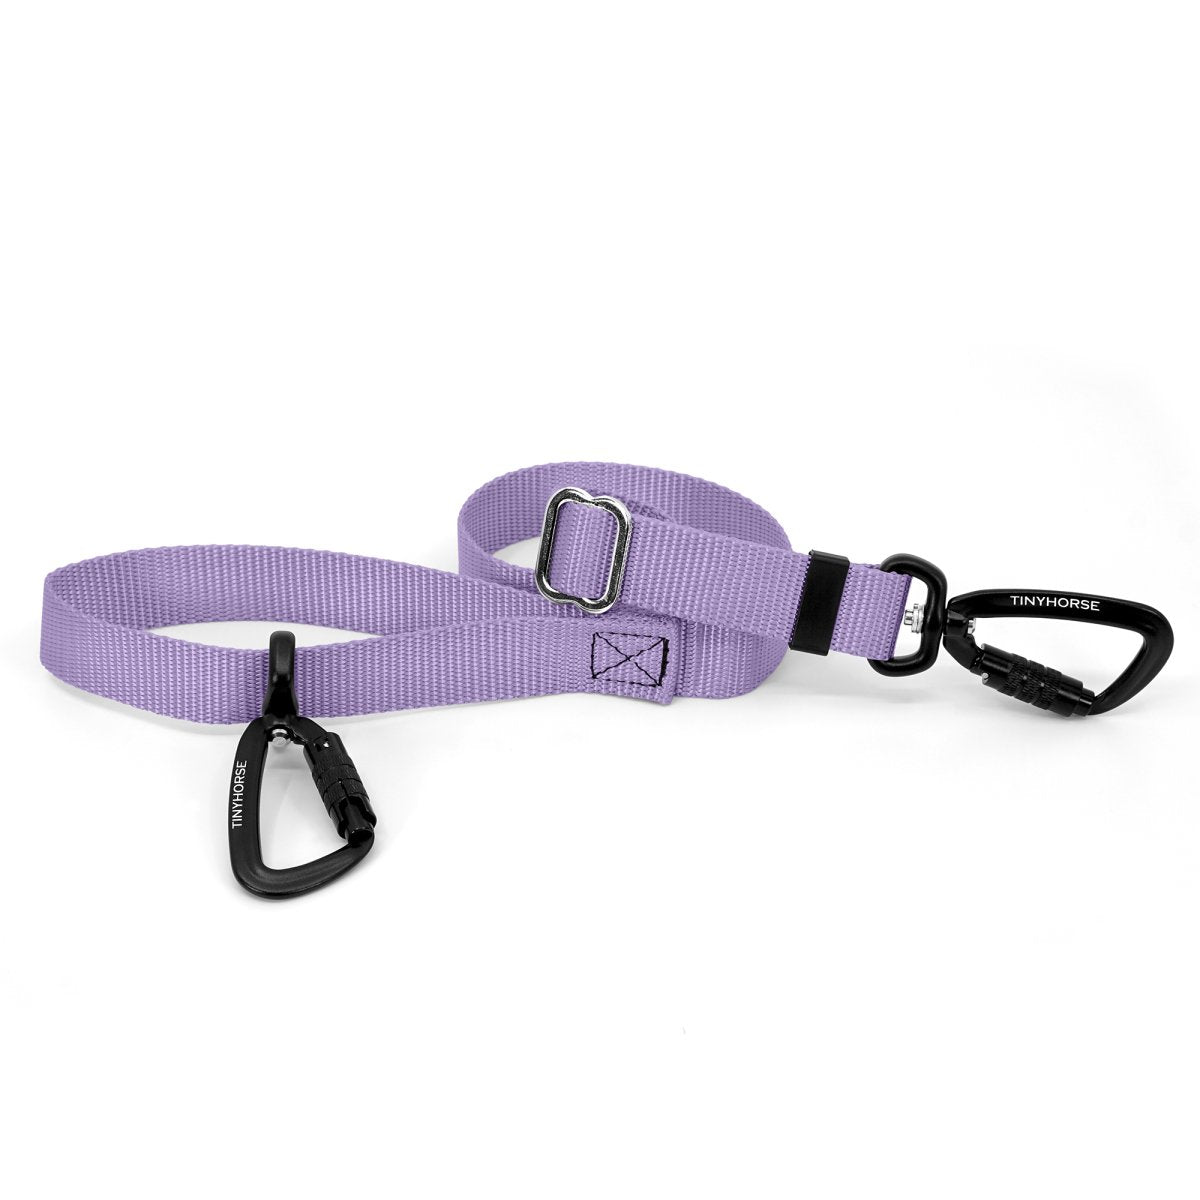 A lavender-coloured Lead-All Lite with an adjustable nylon webbing leash and 2 auto-locking carabiners